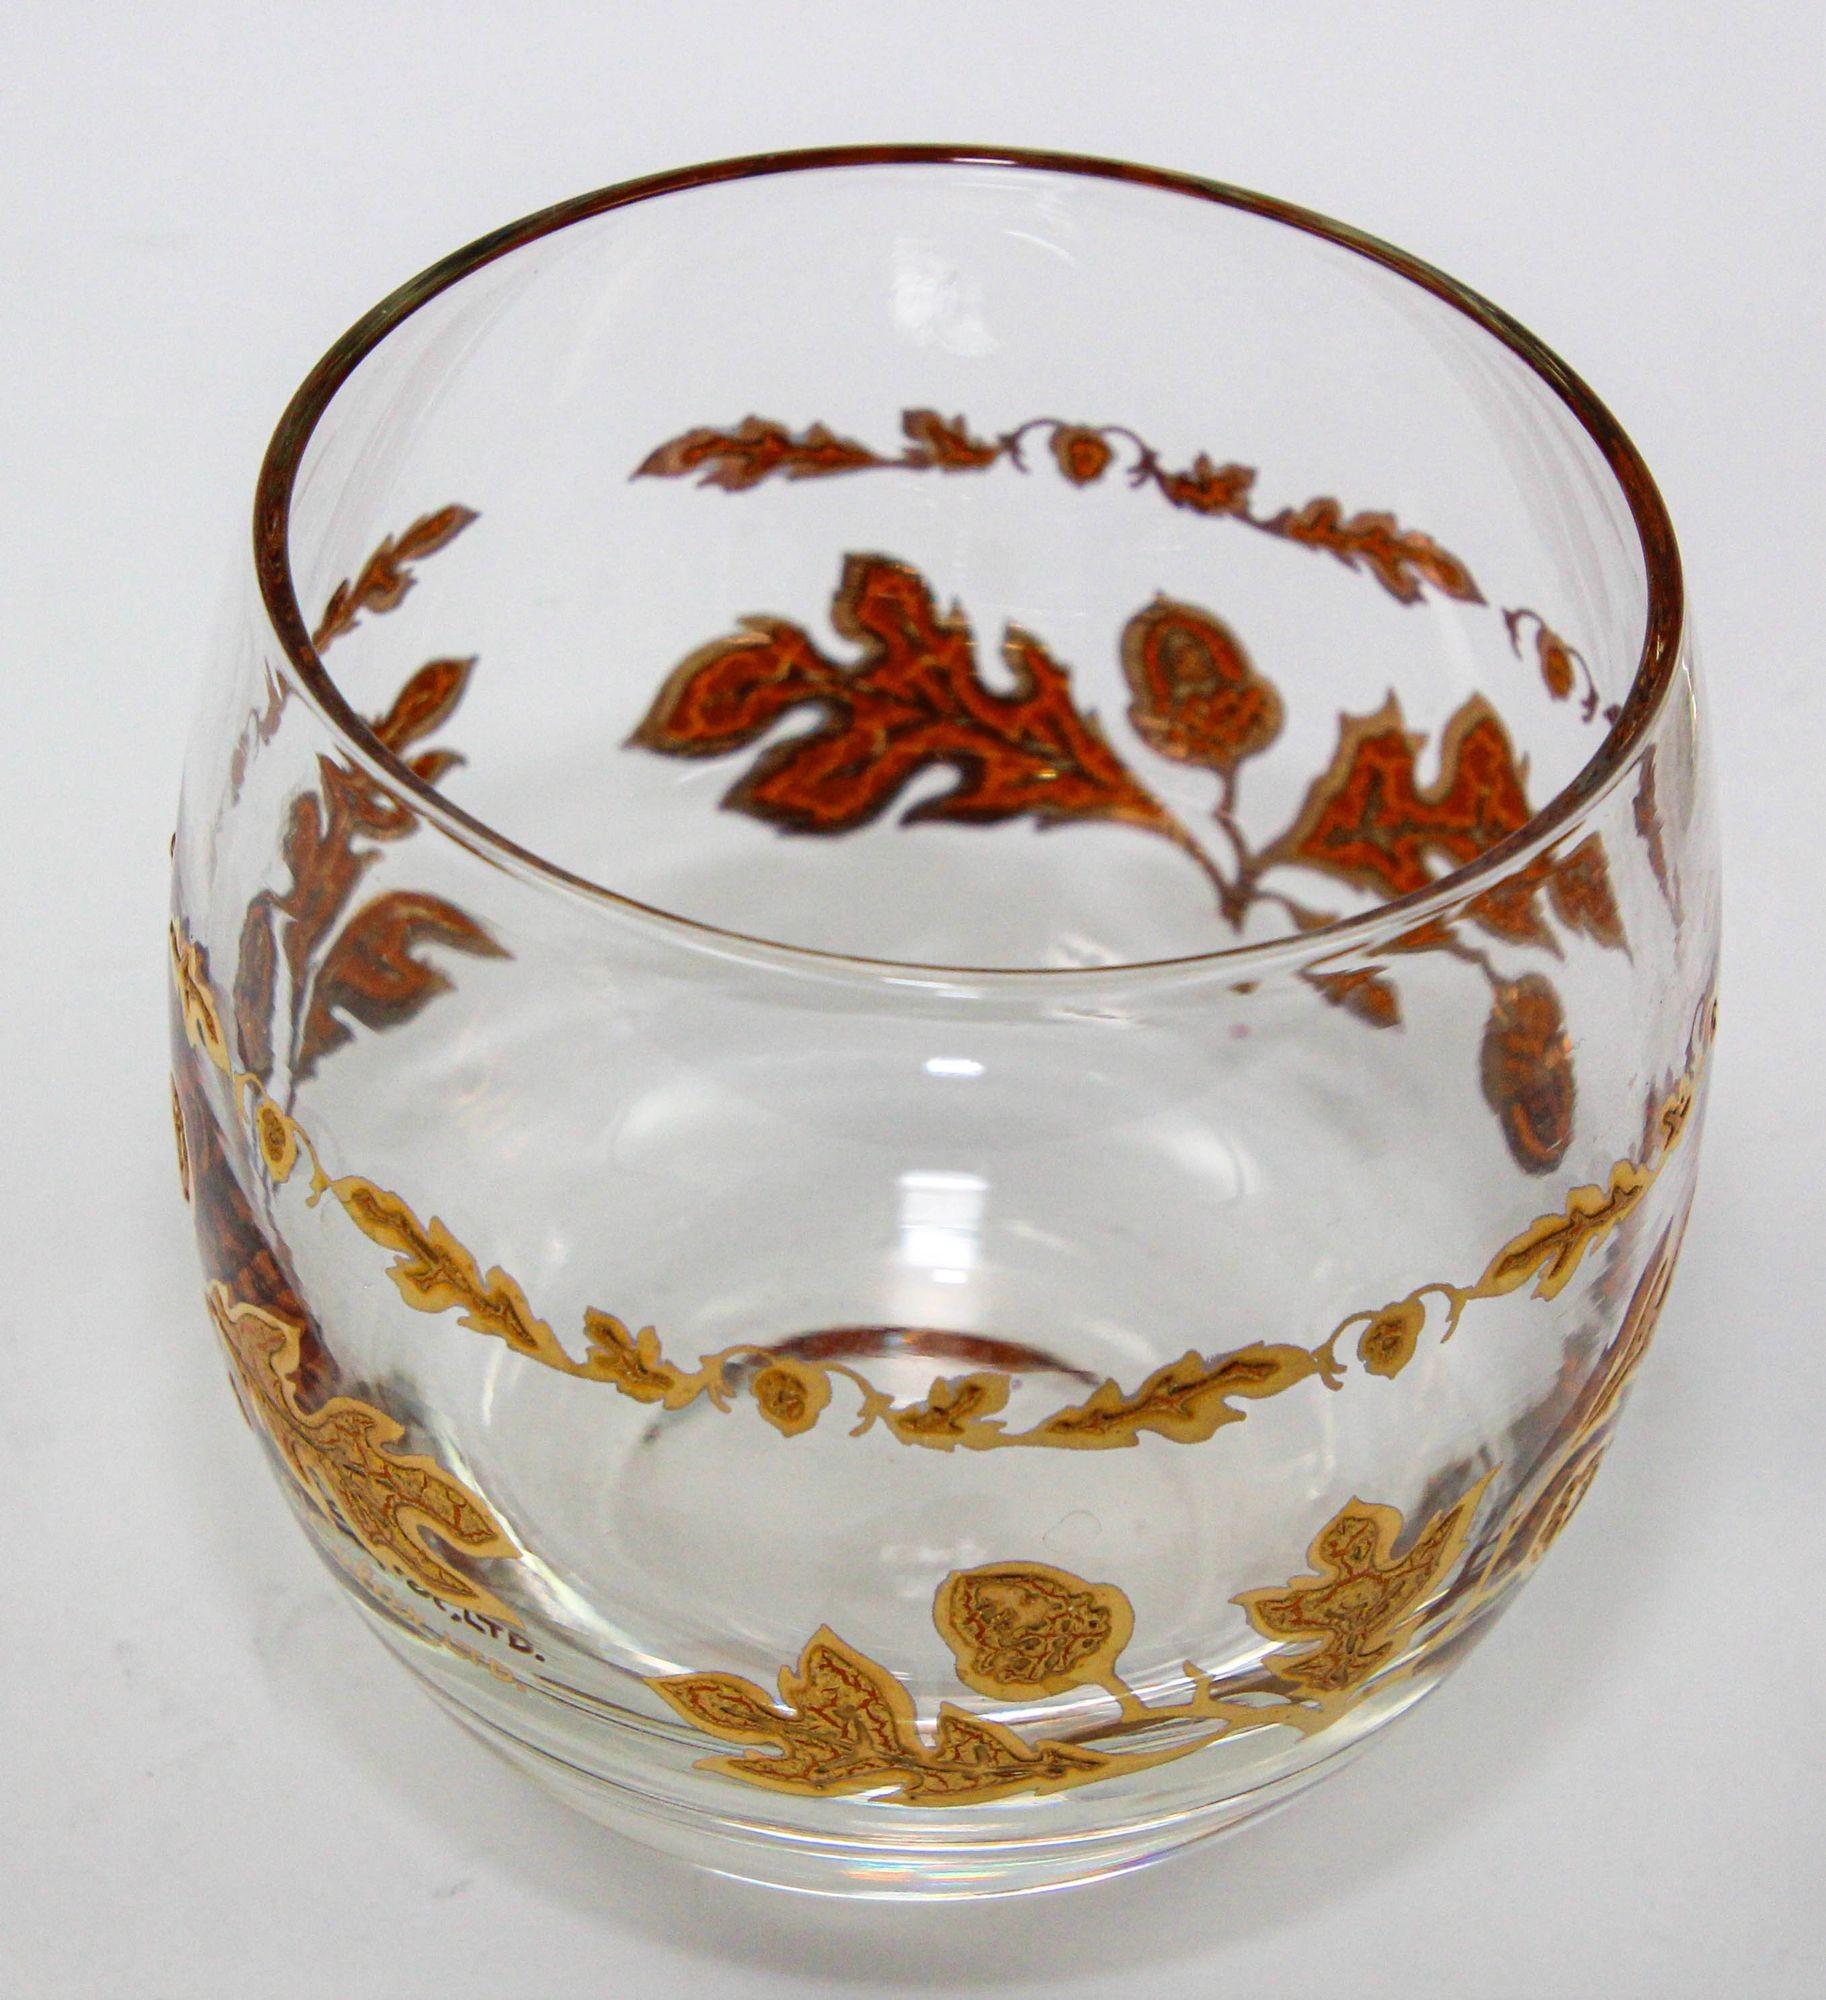 American Culver Ltd Roly Poly Rocks Glasses 22K Gold Floral Chantilly Pattern 1950s